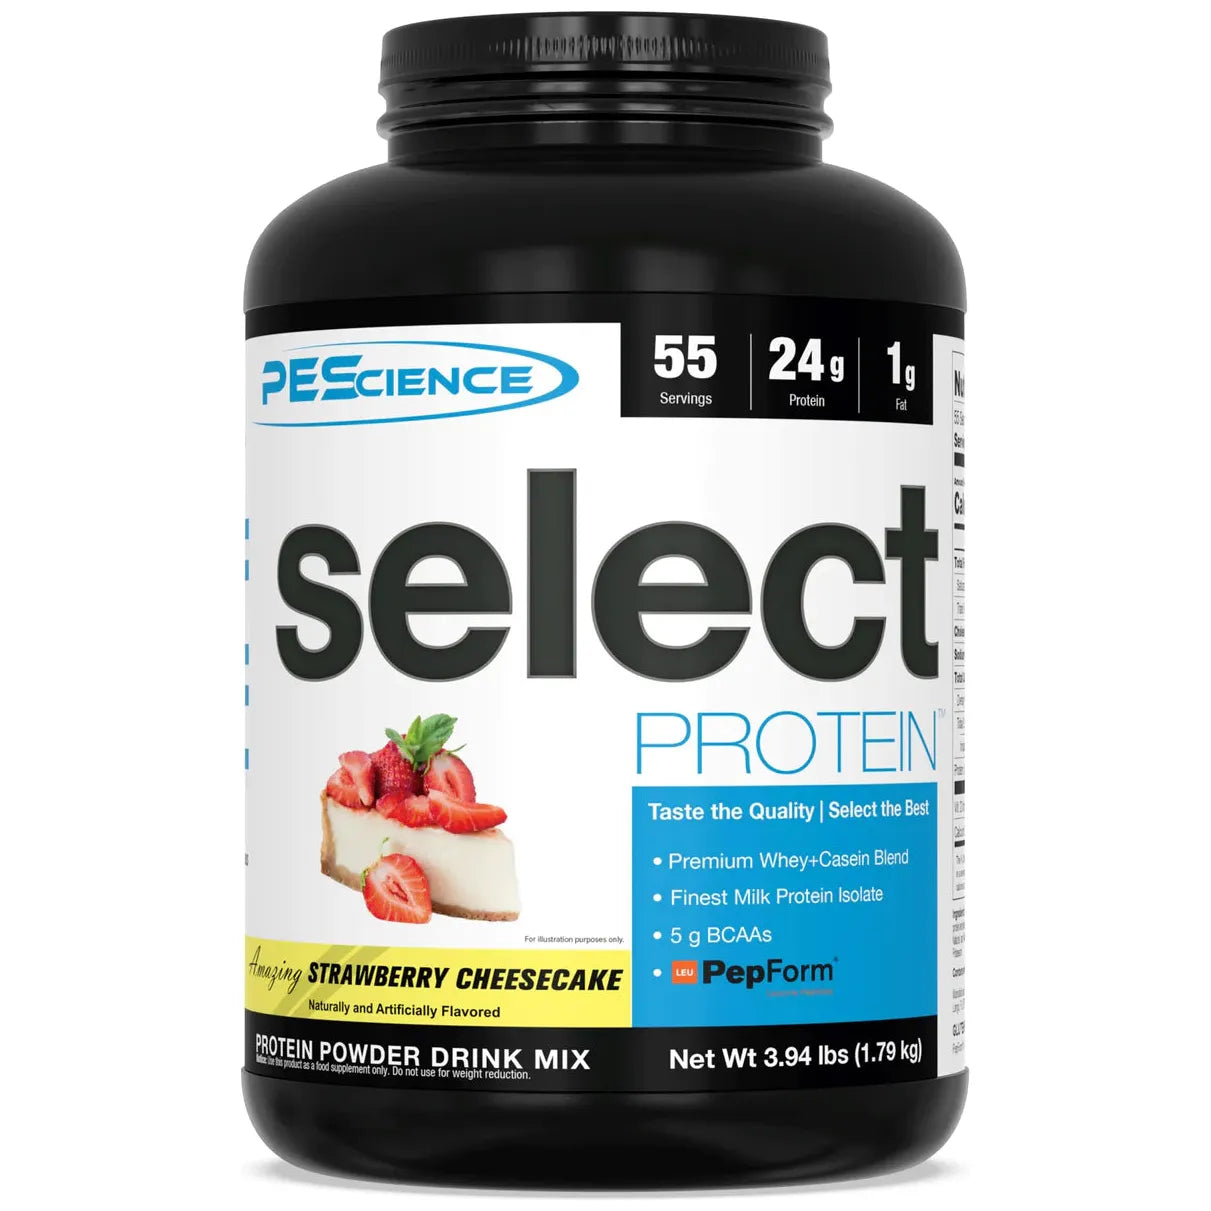 PEScience Select Protein (55 servings) pescience-select-protein-5lbs Whey Protein Blend Strawberry Cheesecake PEScience